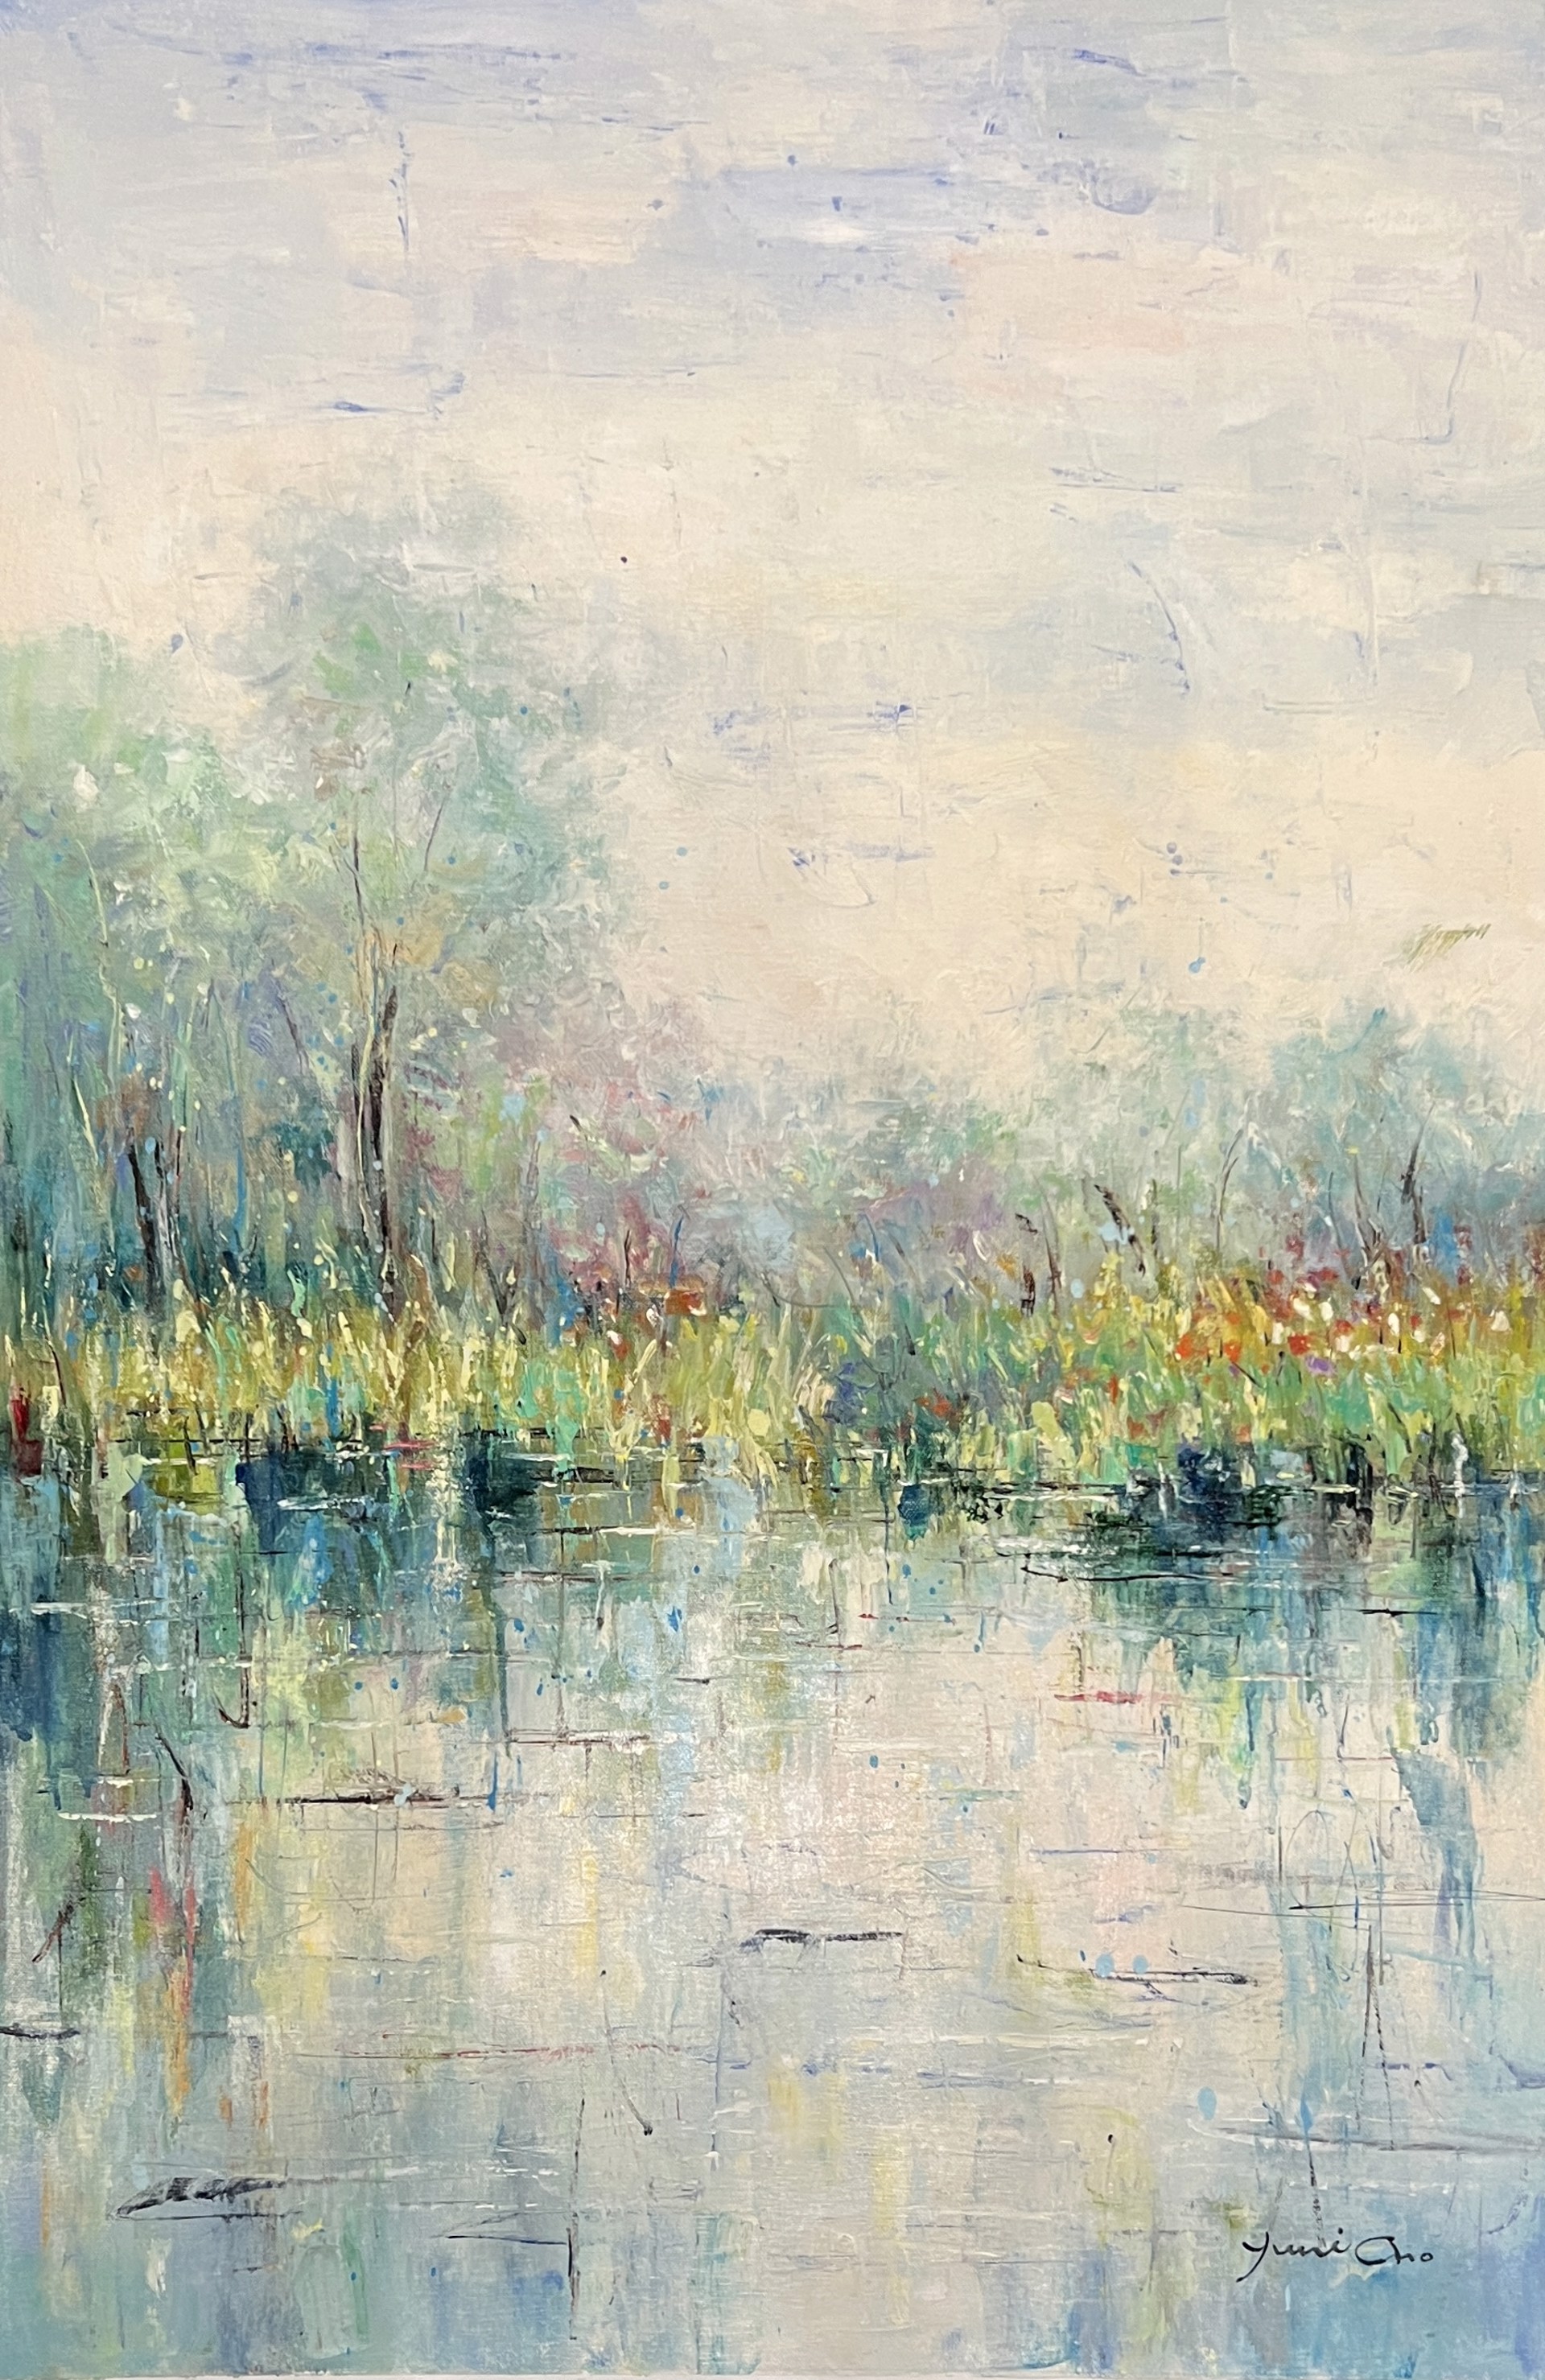 WATER REEDS AND WOODS by YOUNI CHO